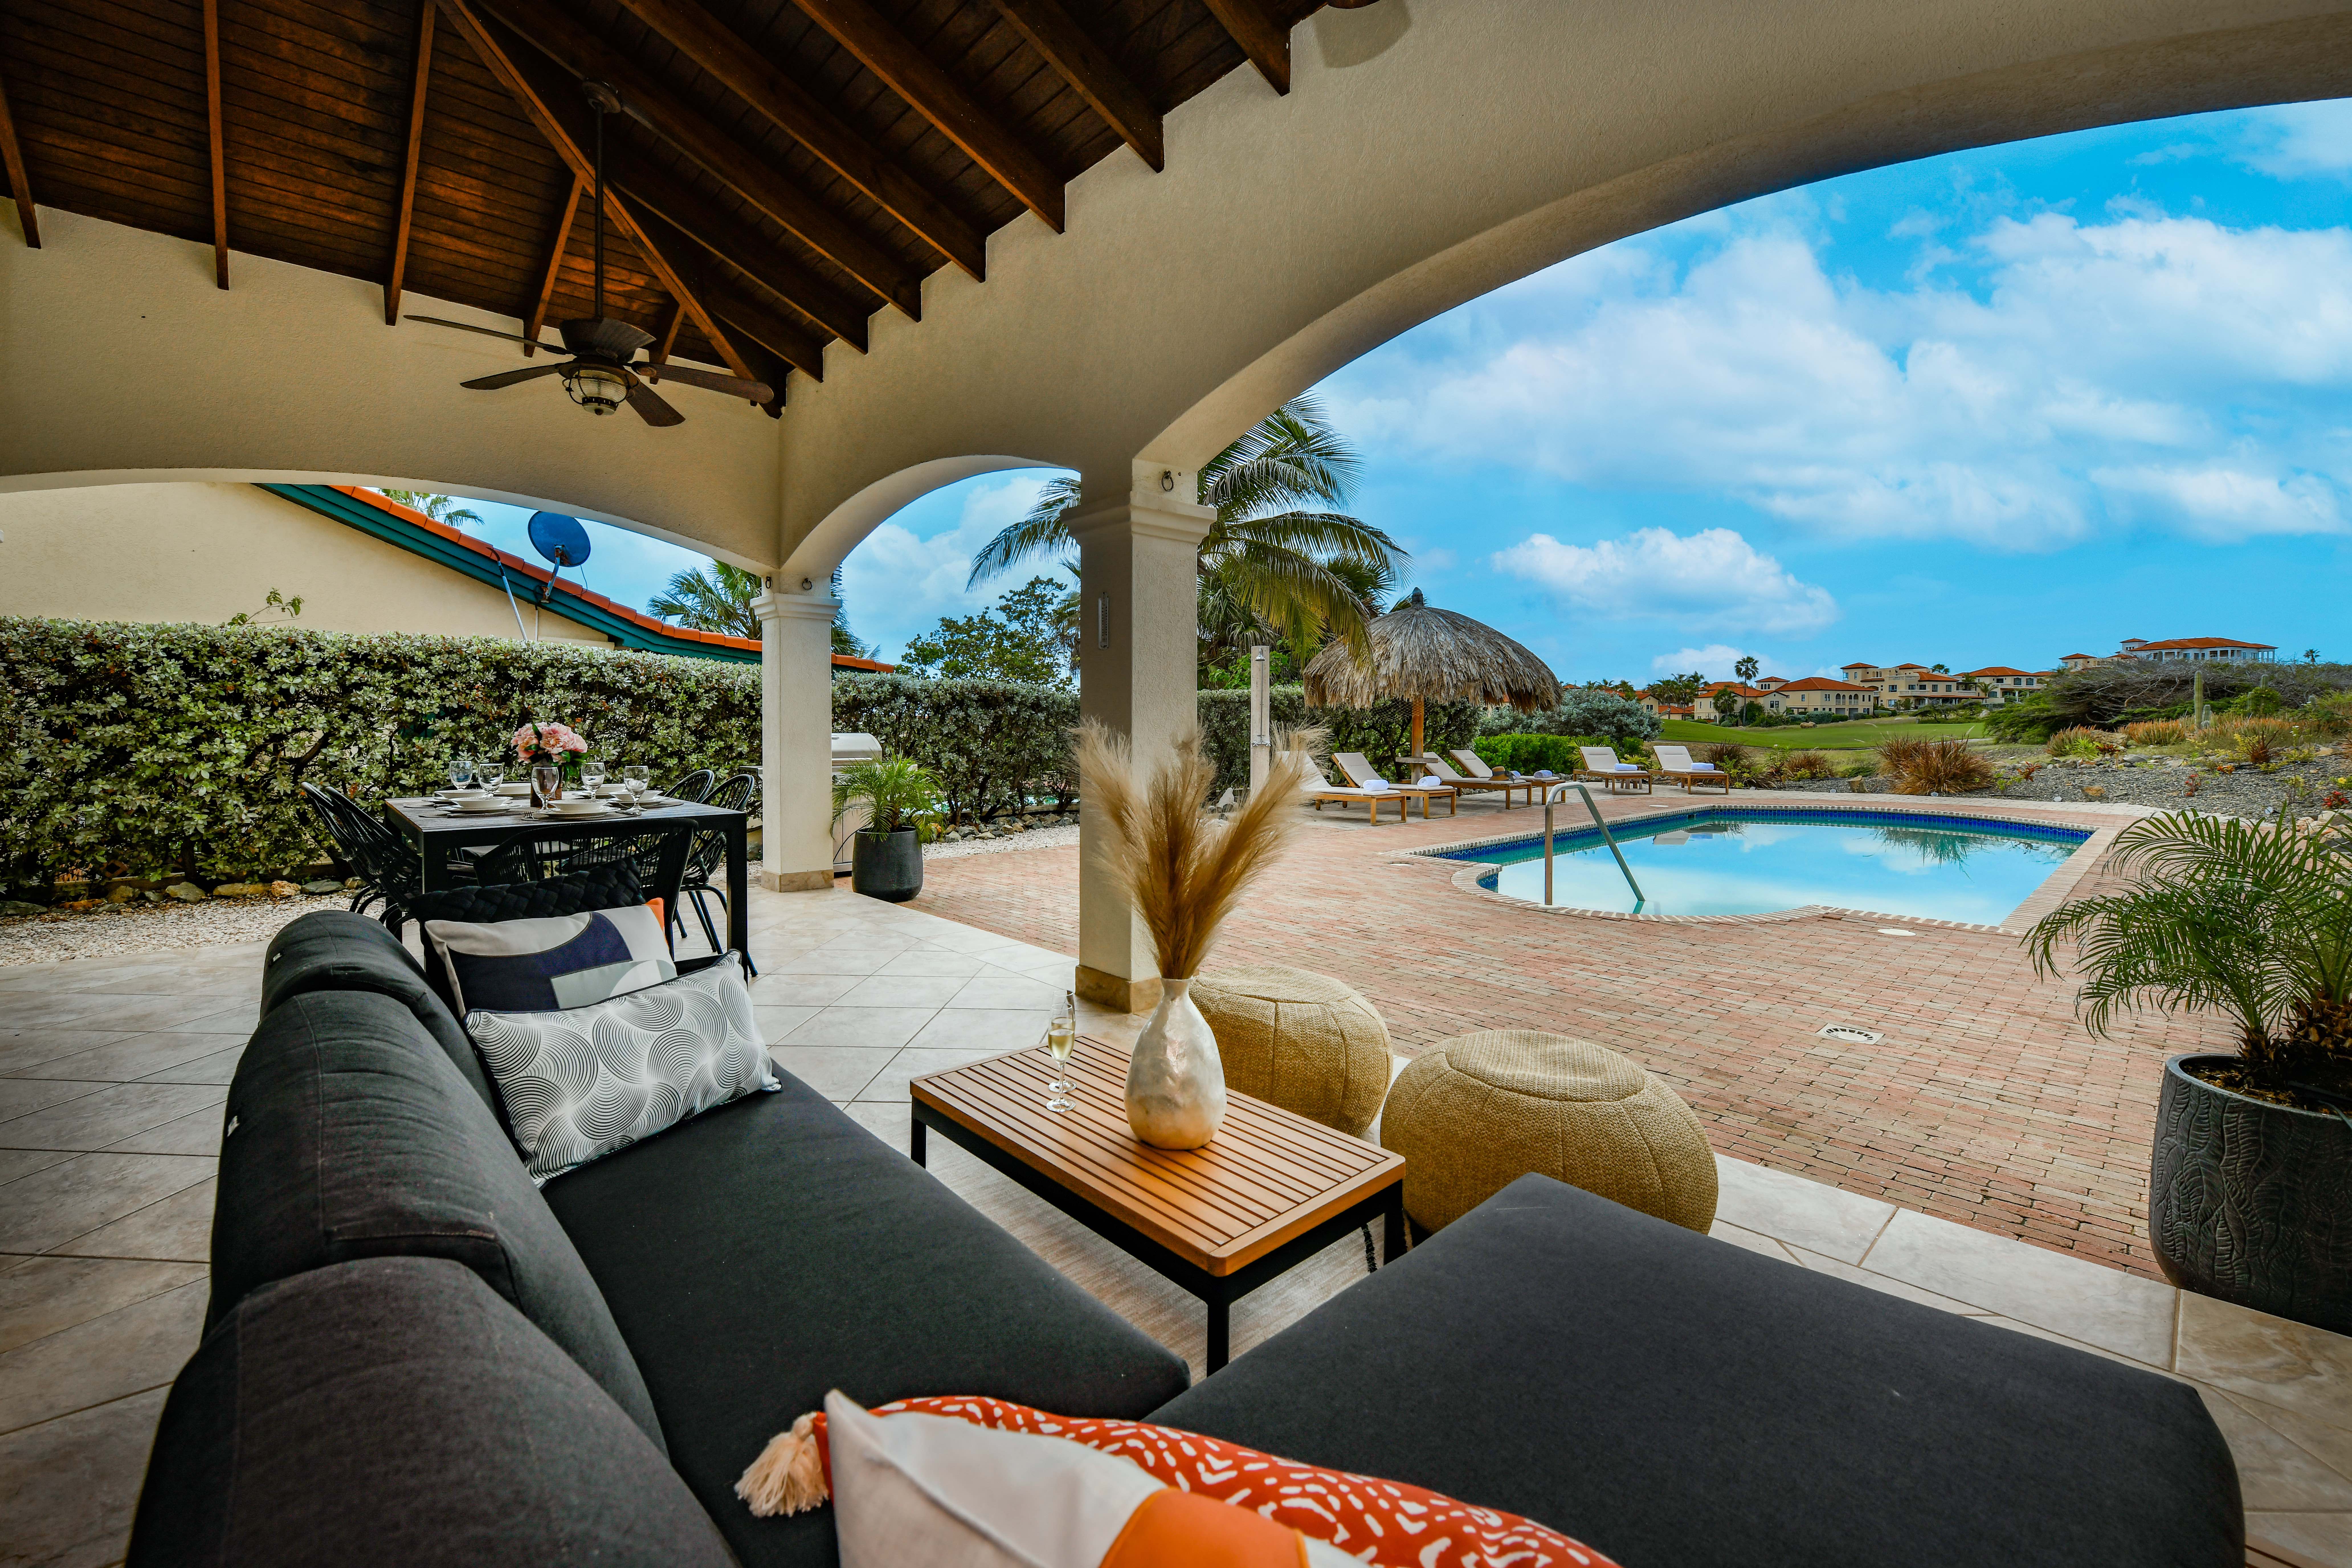 Take advantage of the private pool and hot tub at our villa, designed for your comfort and pleasure.